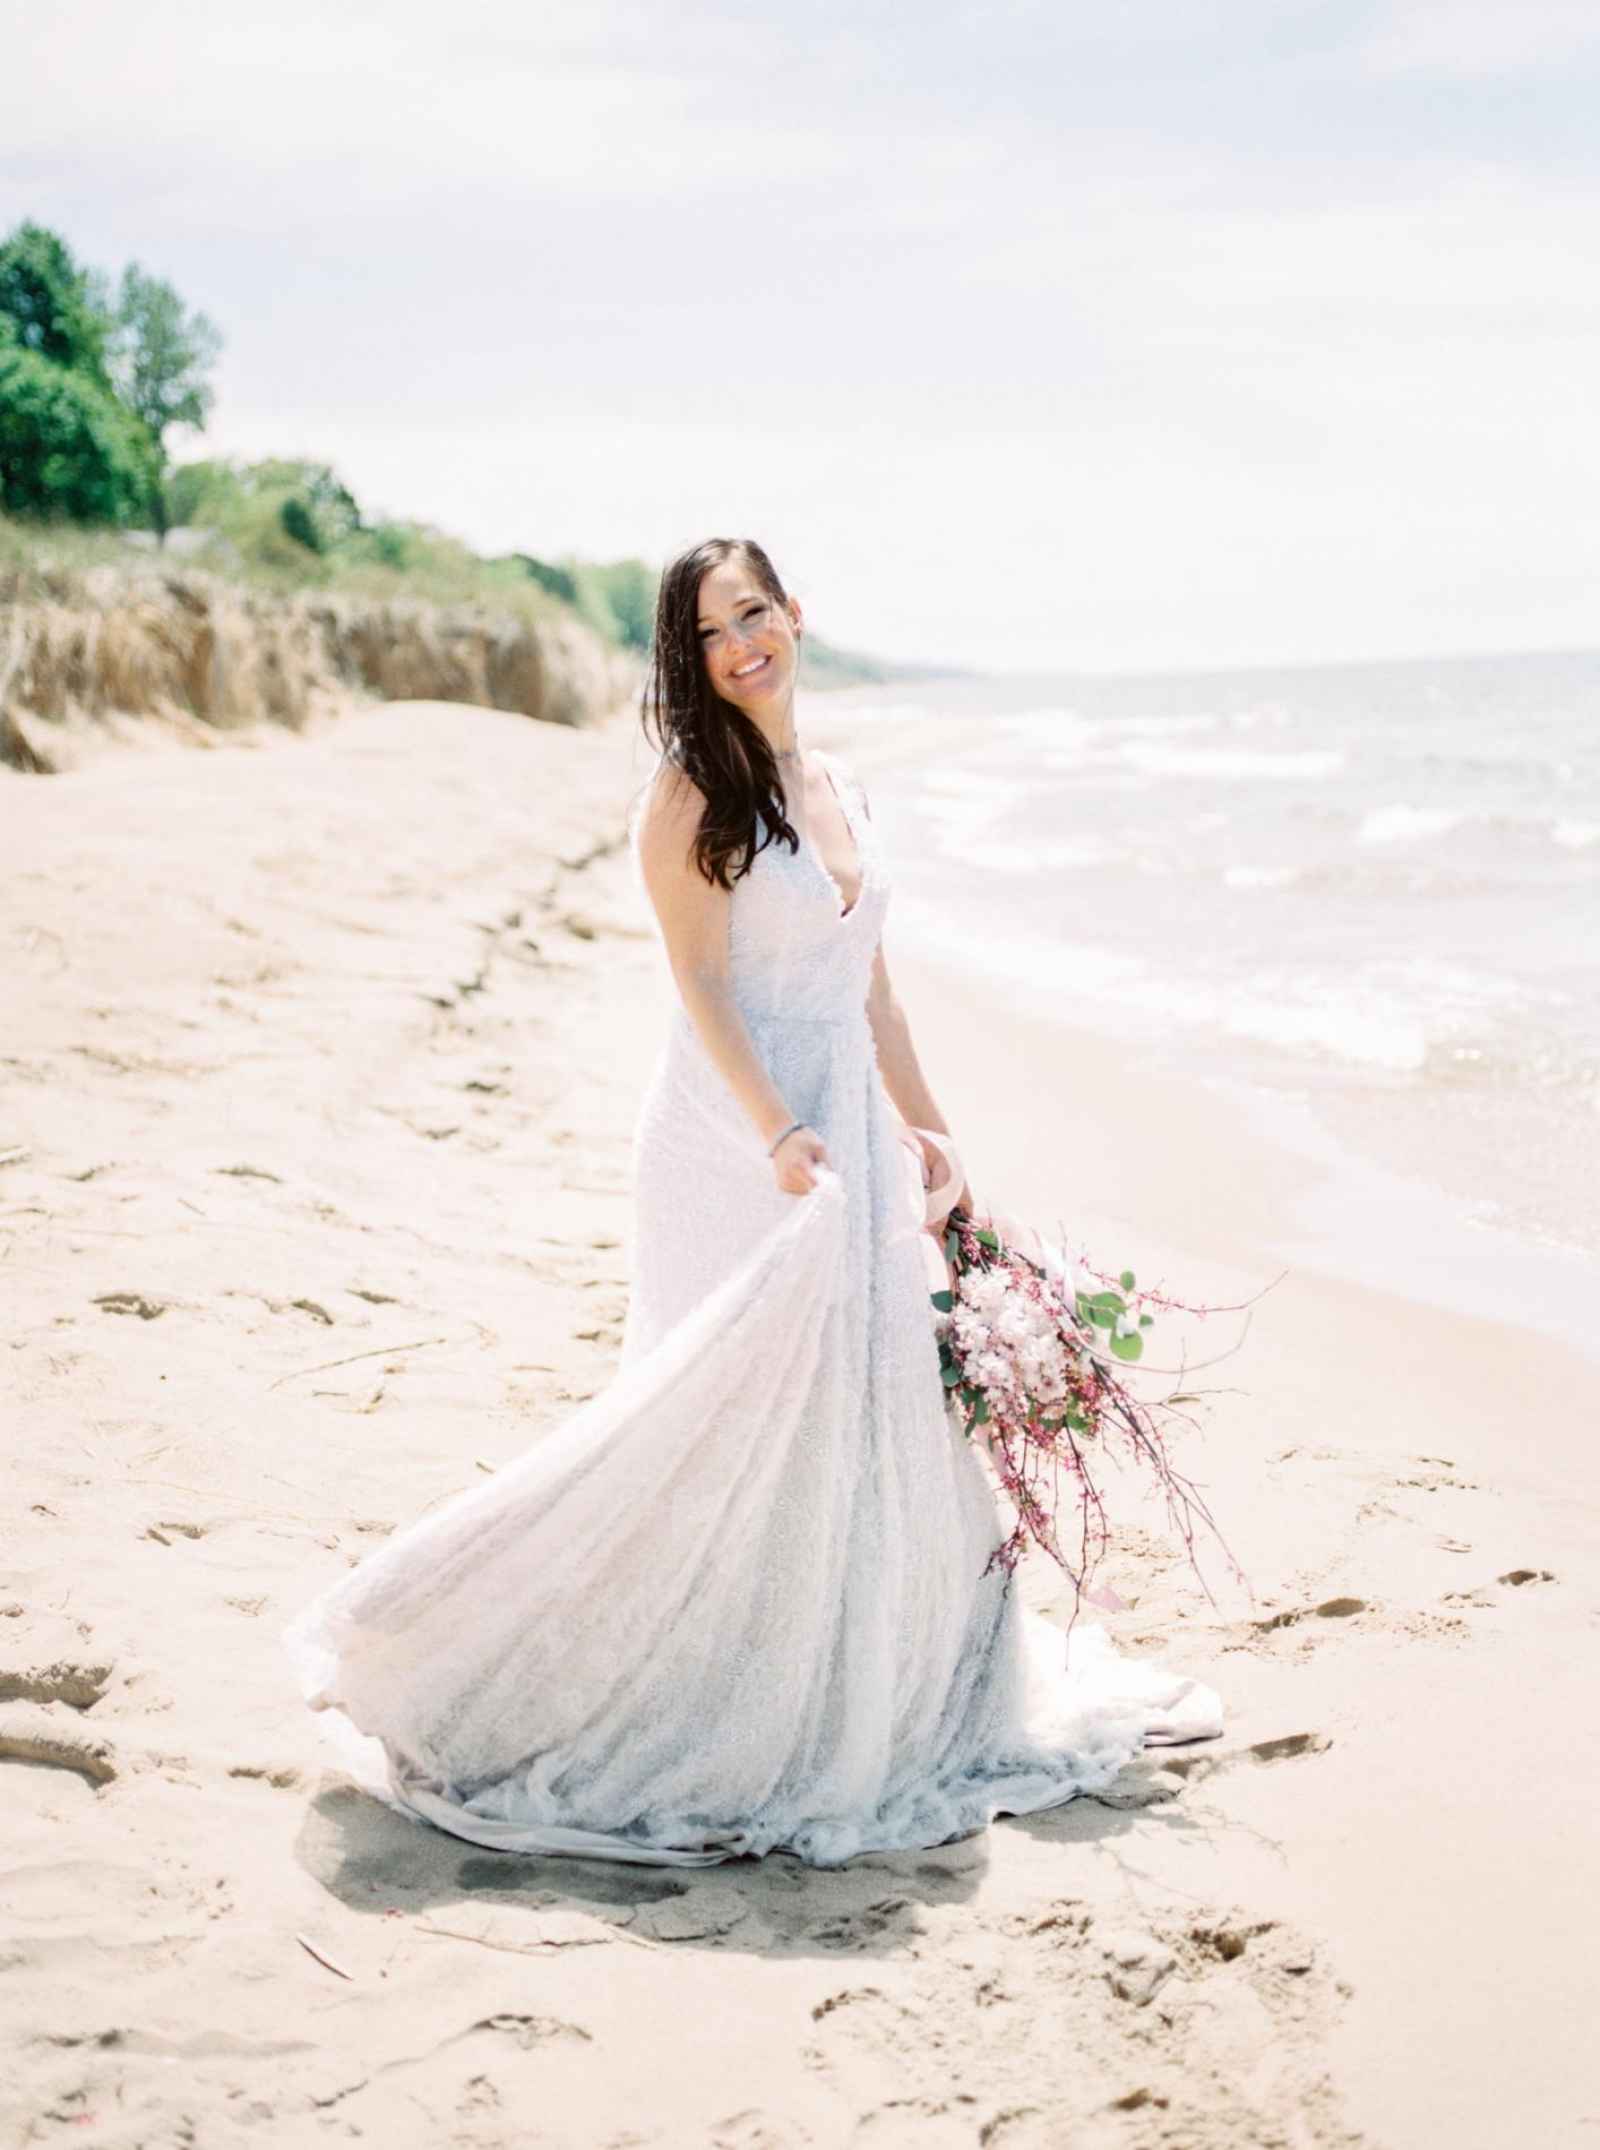 Love by the Shore: A Michigan-Inspired Style Shoot | WeddingDay Magazine